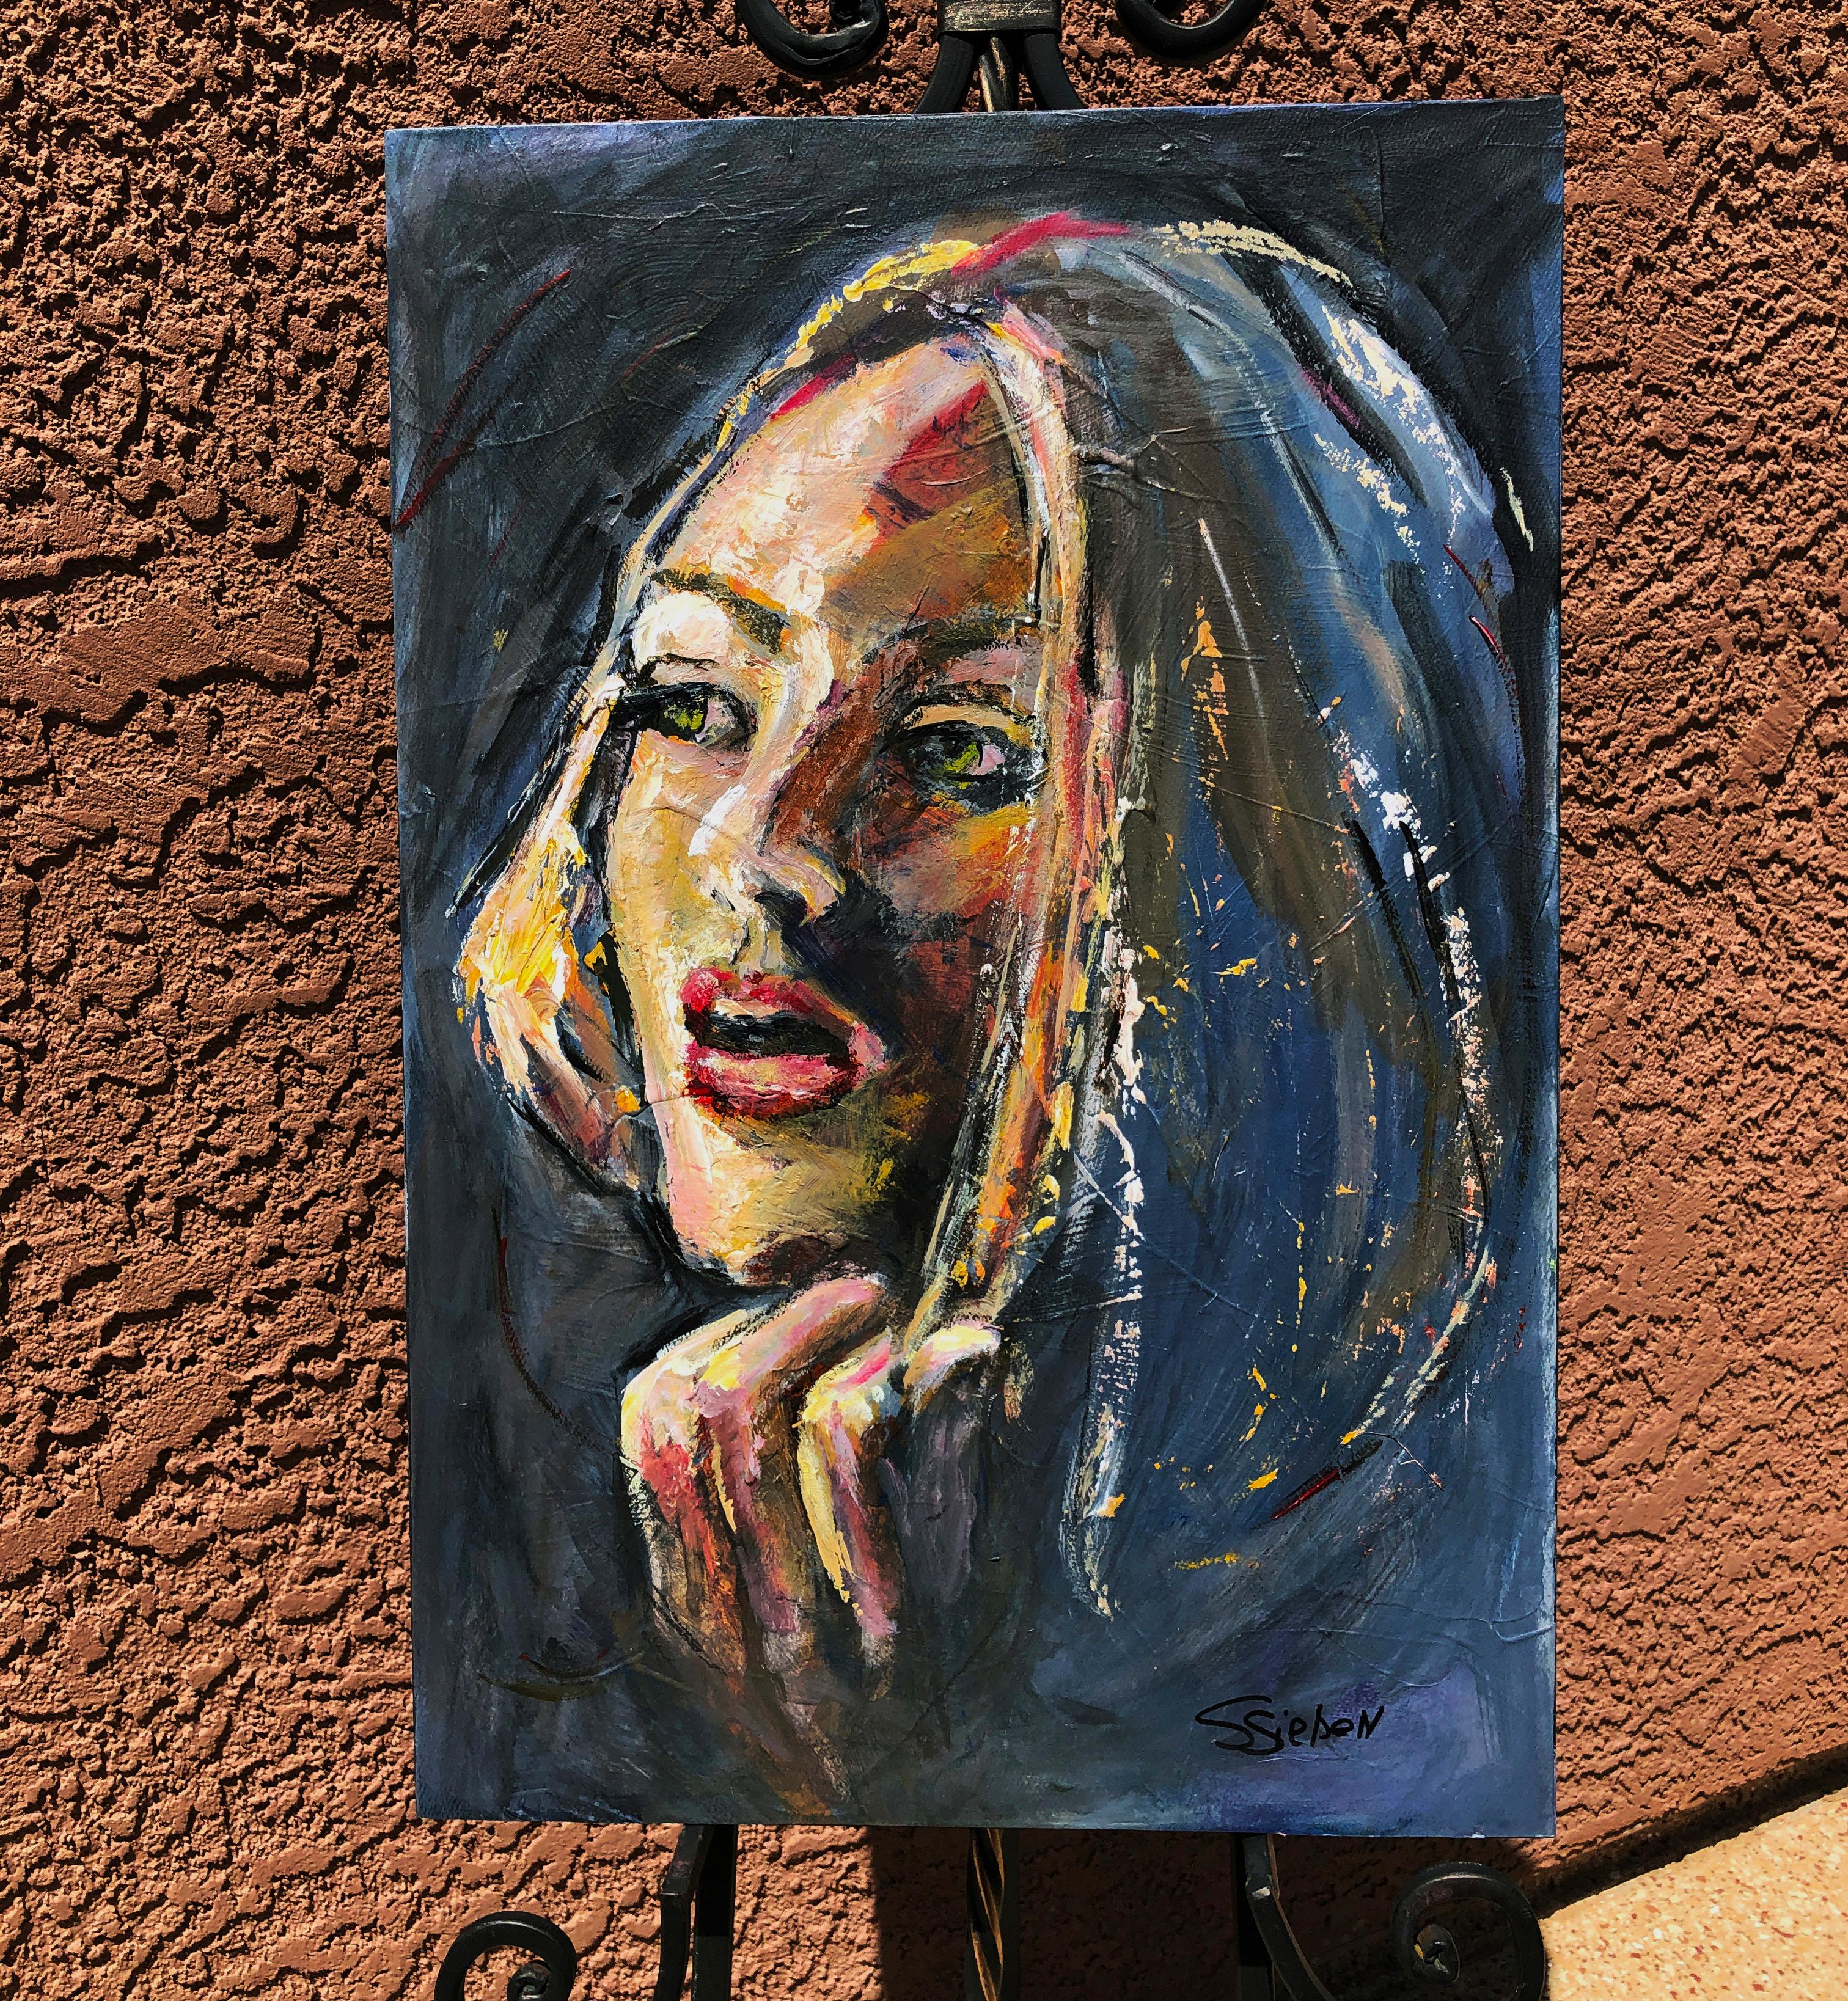 <p>Artist Comments<br>When asked about the inspiration behind this expressionist portrait, artist Sharon Sieben replied, 